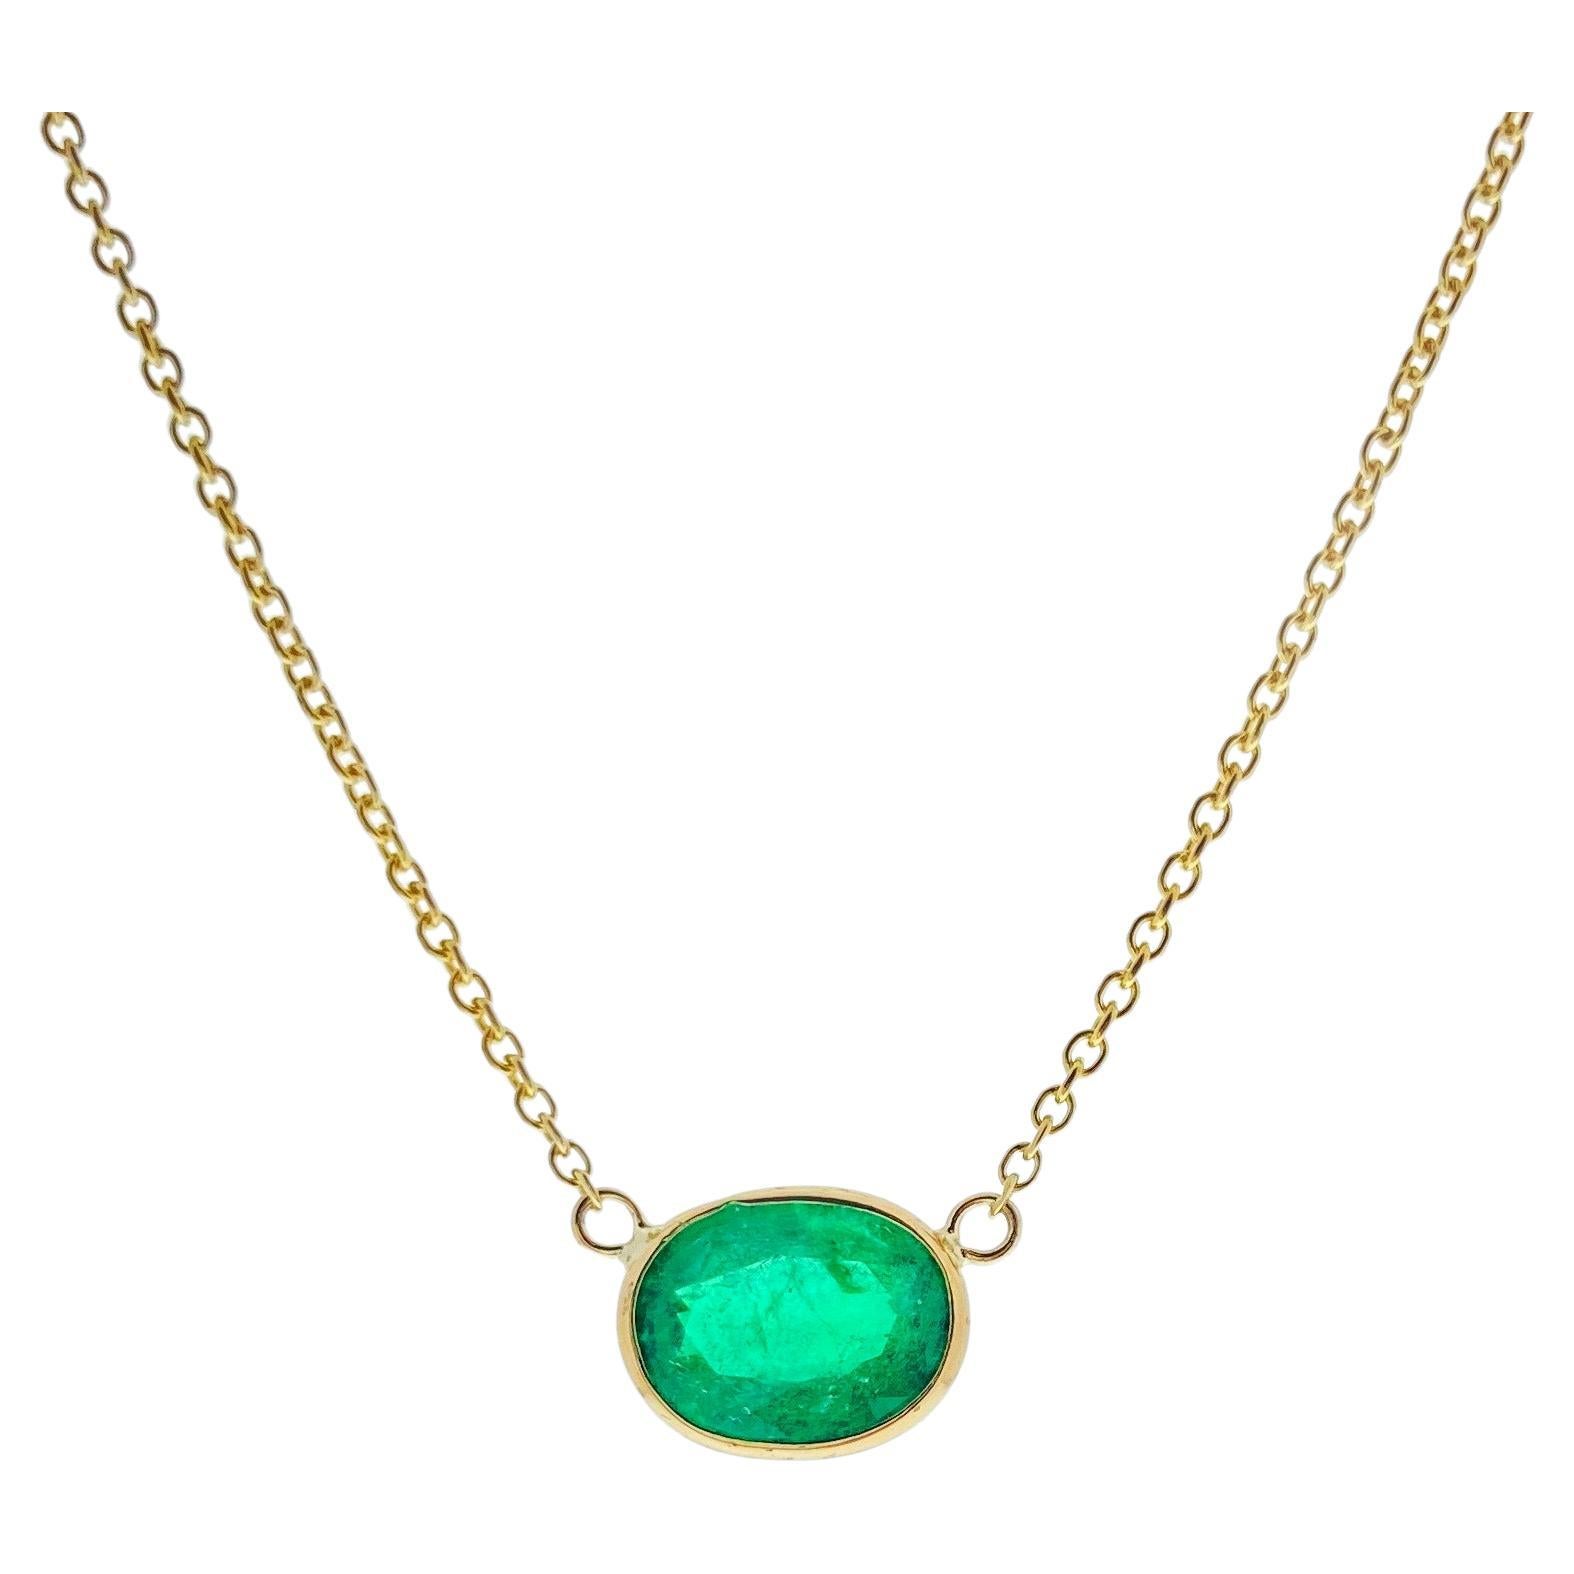 1.44 Carat Green Emerald Oval Cut Fashion Necklaces In 14K Yellow Gold For Sale